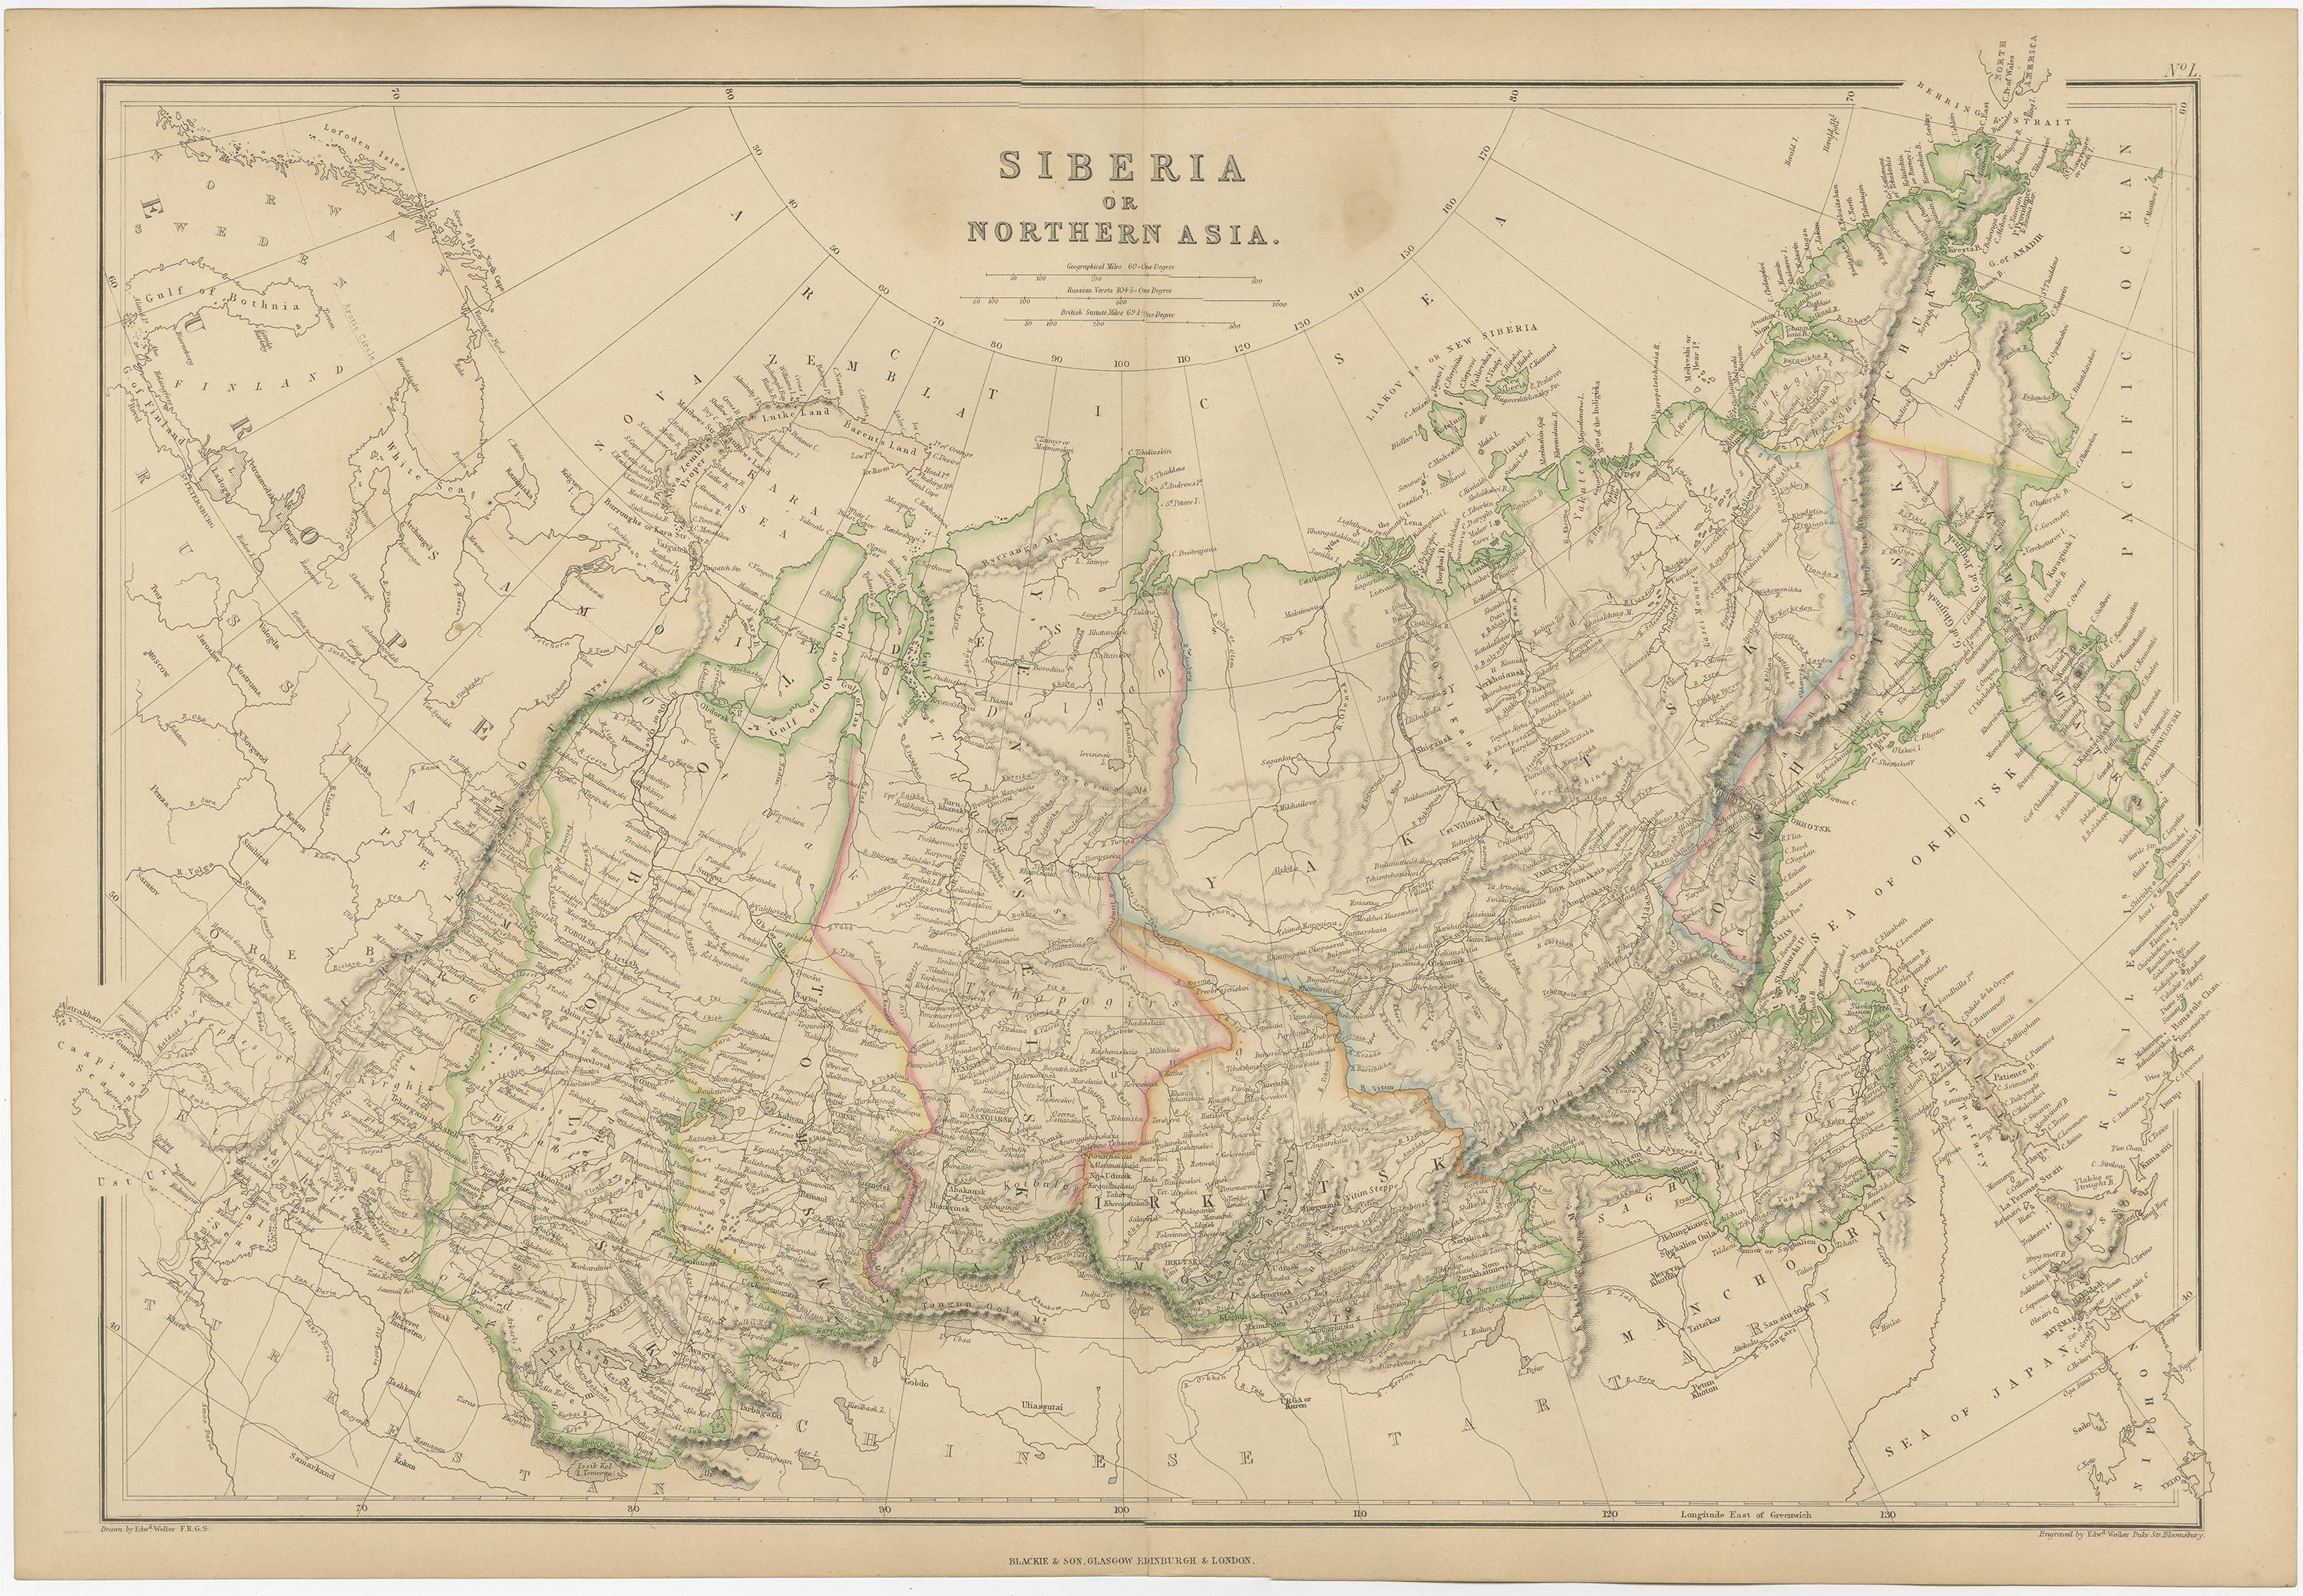 Antique map titled 'Siberia or Northern Asia'. Original antique map of Siberia or Northern Asia. This map originates from ‘The Imperial Atlas of Modern Geography’. Published by W. G. Blackie, 1859.